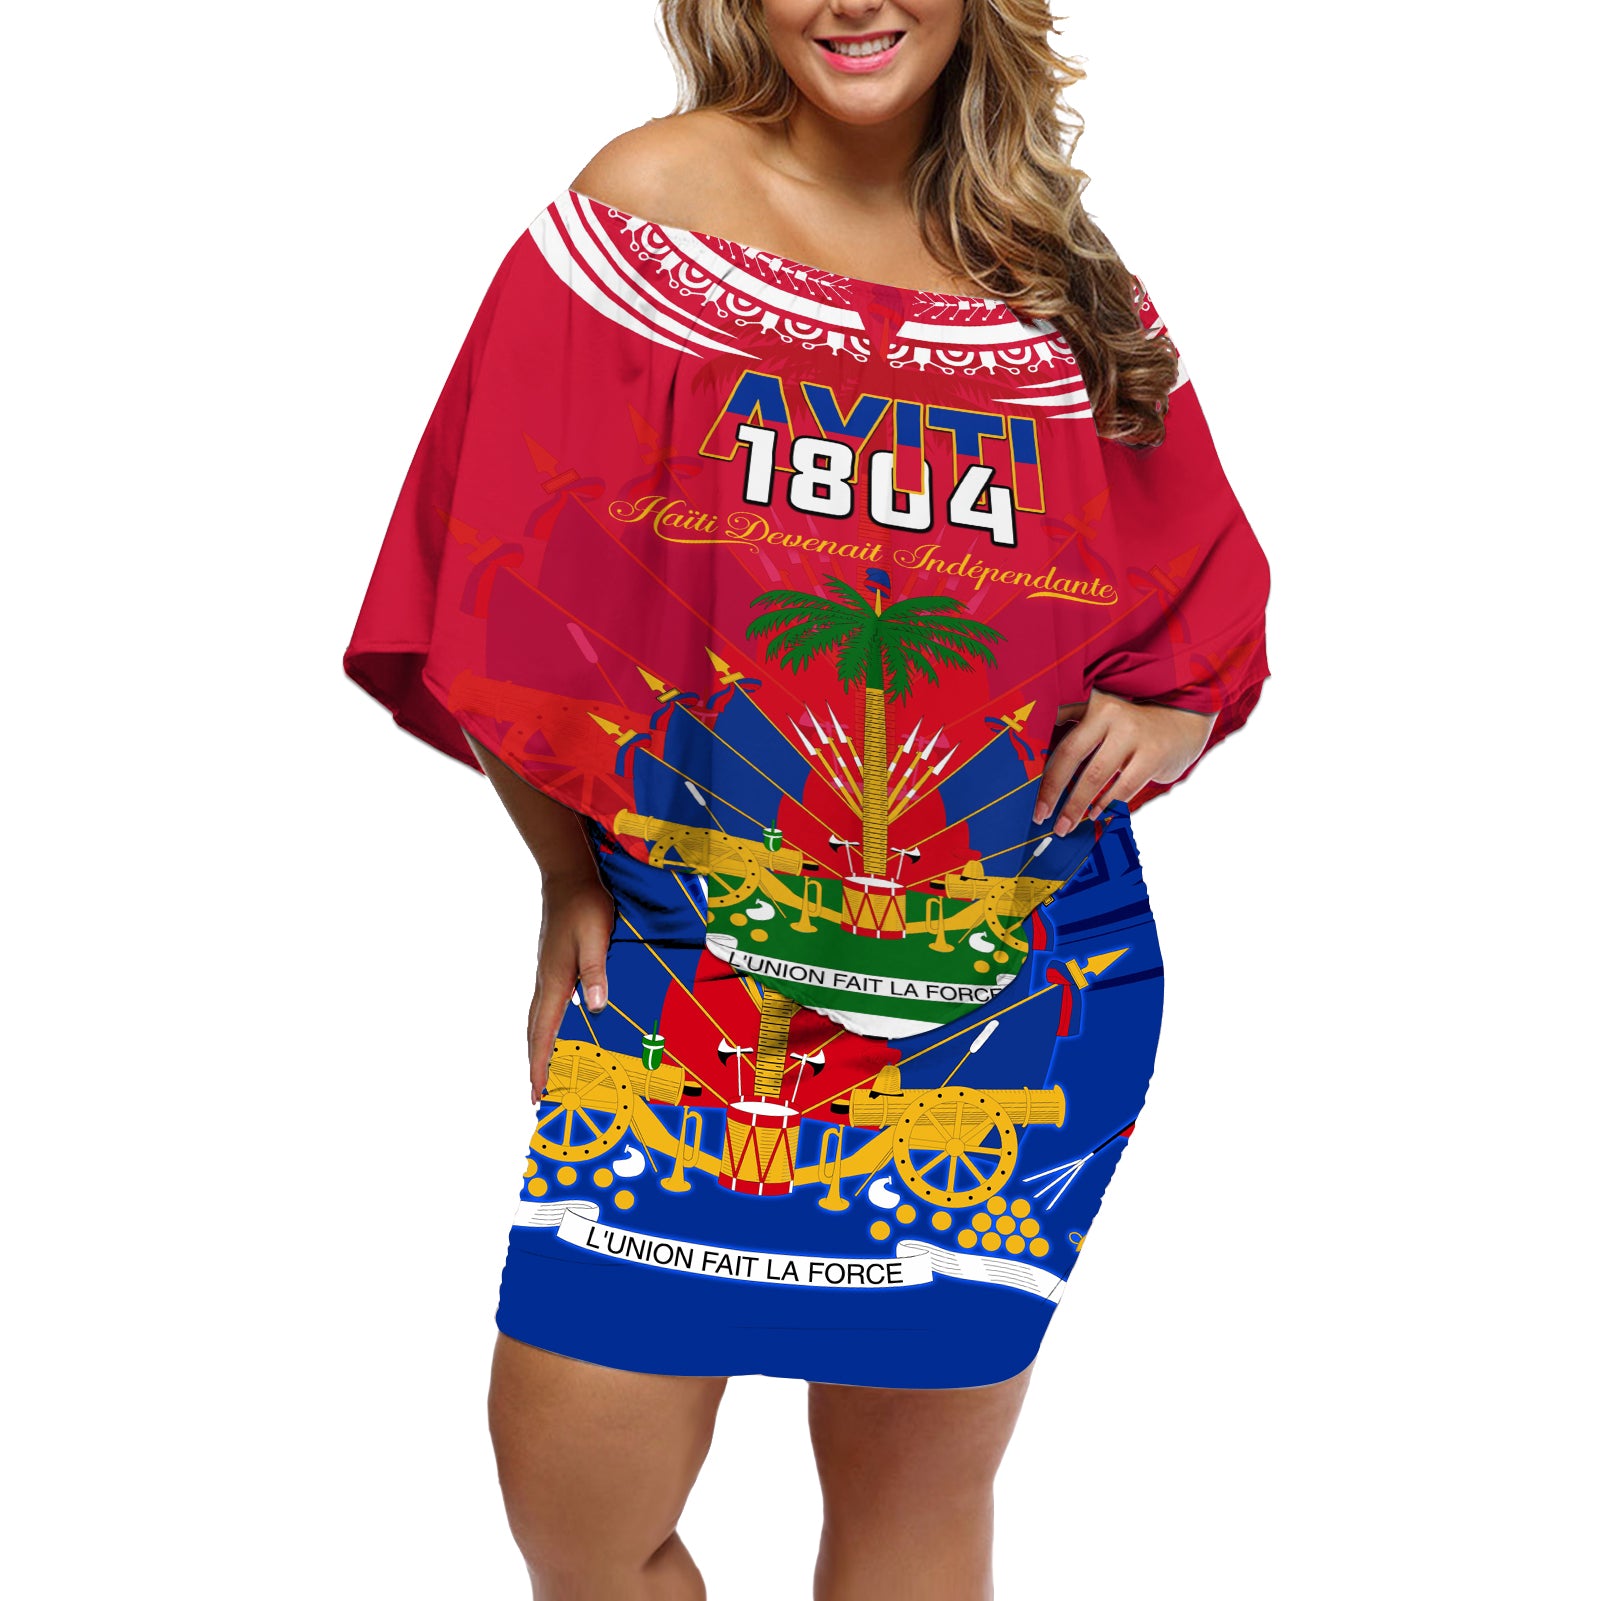 haiti-independence-day-off-shoulder-short-dress-libete-egalite-fratenite-ayiti-1804-with-polynesian-pattern